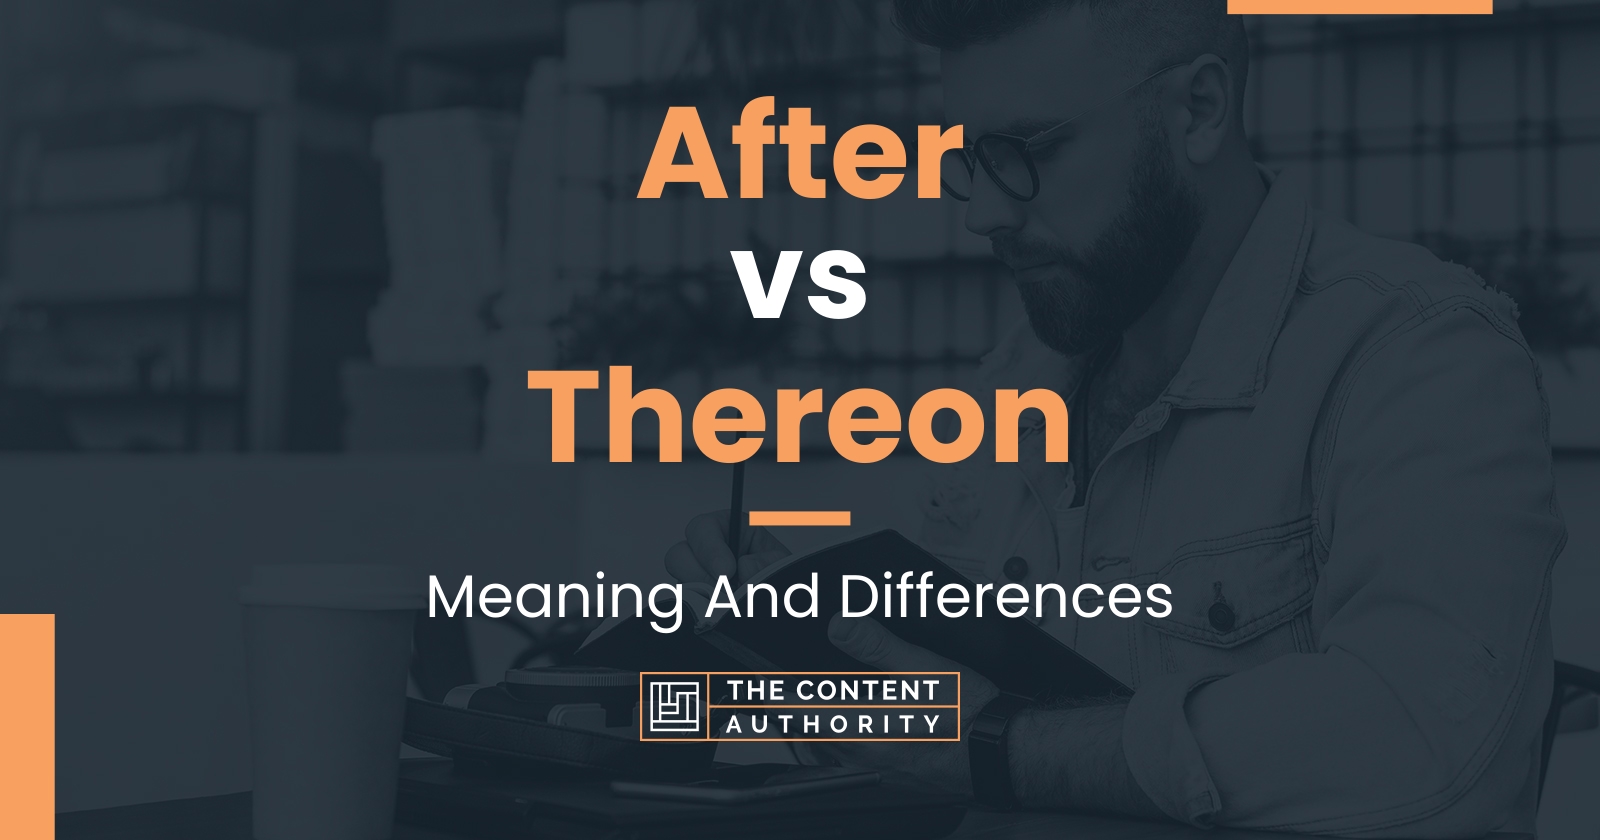 After vs Thereon: Meaning And Differences